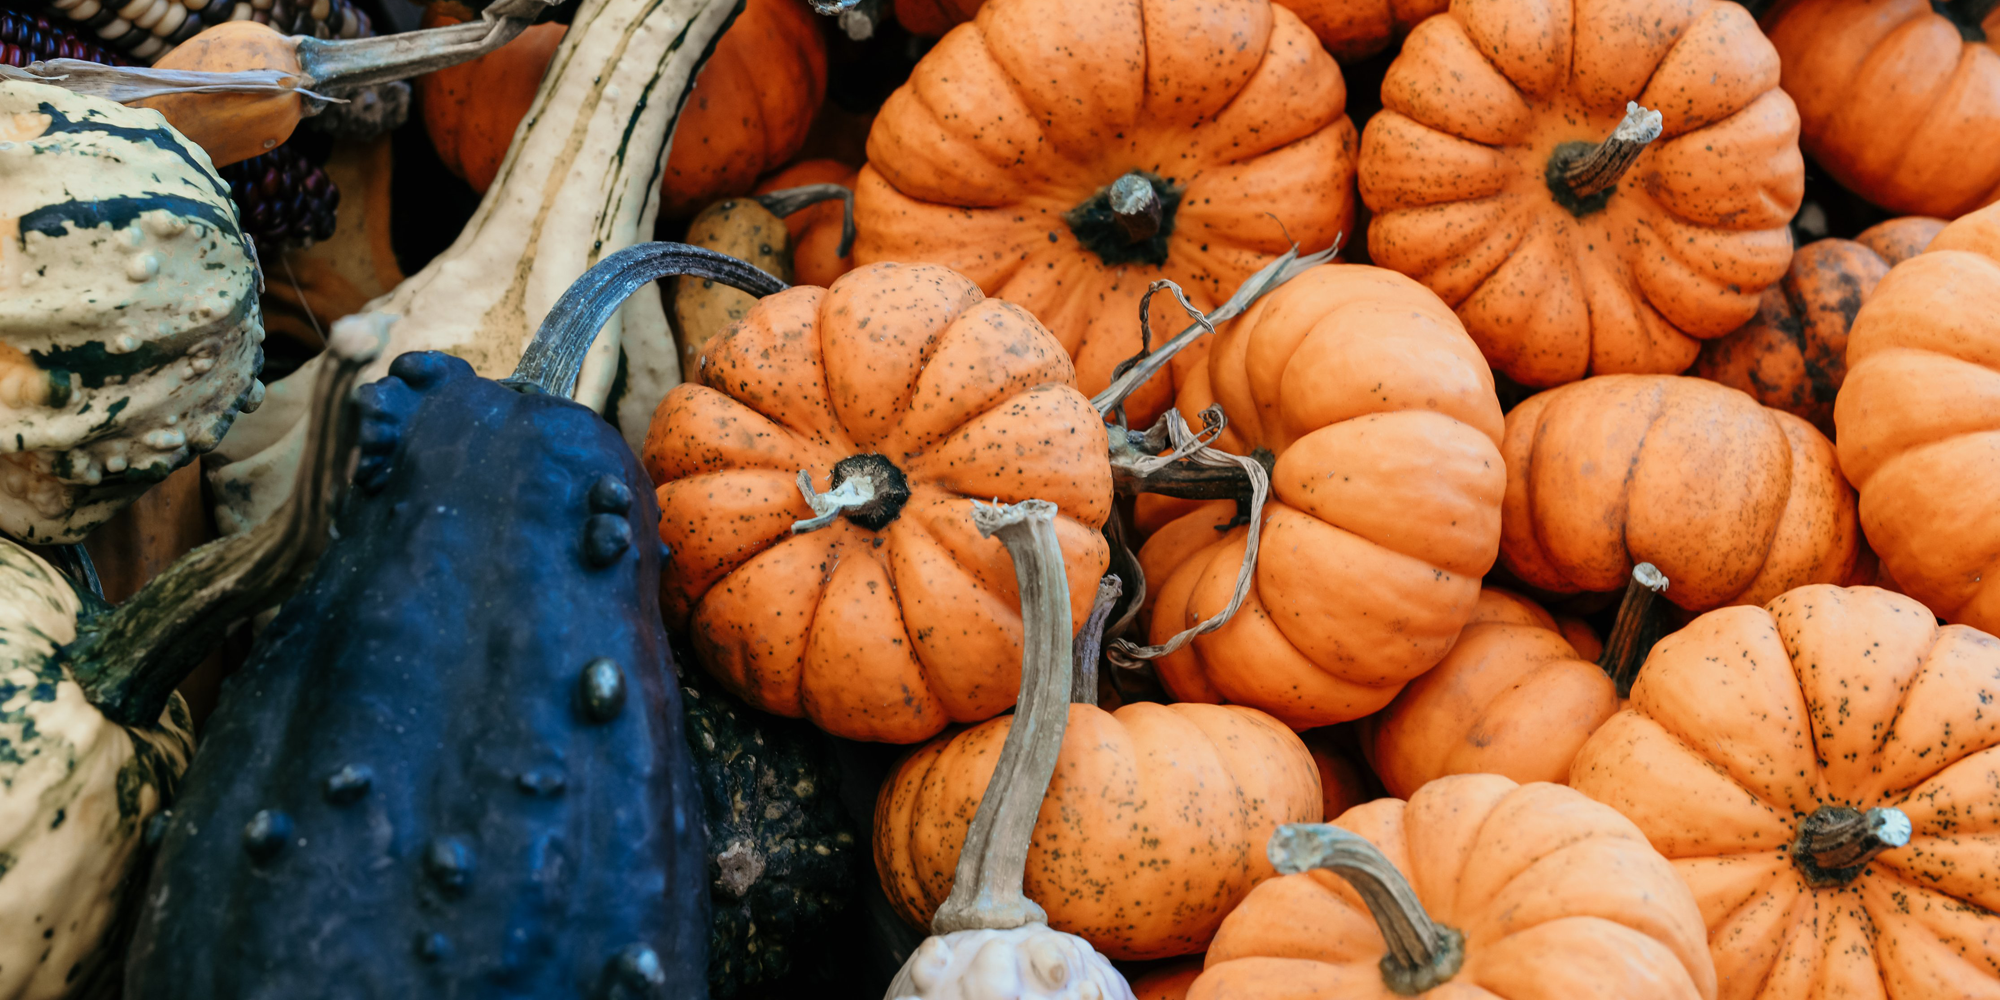 OverSoyed Fine Organic Products - Annual Pumpkin Festival